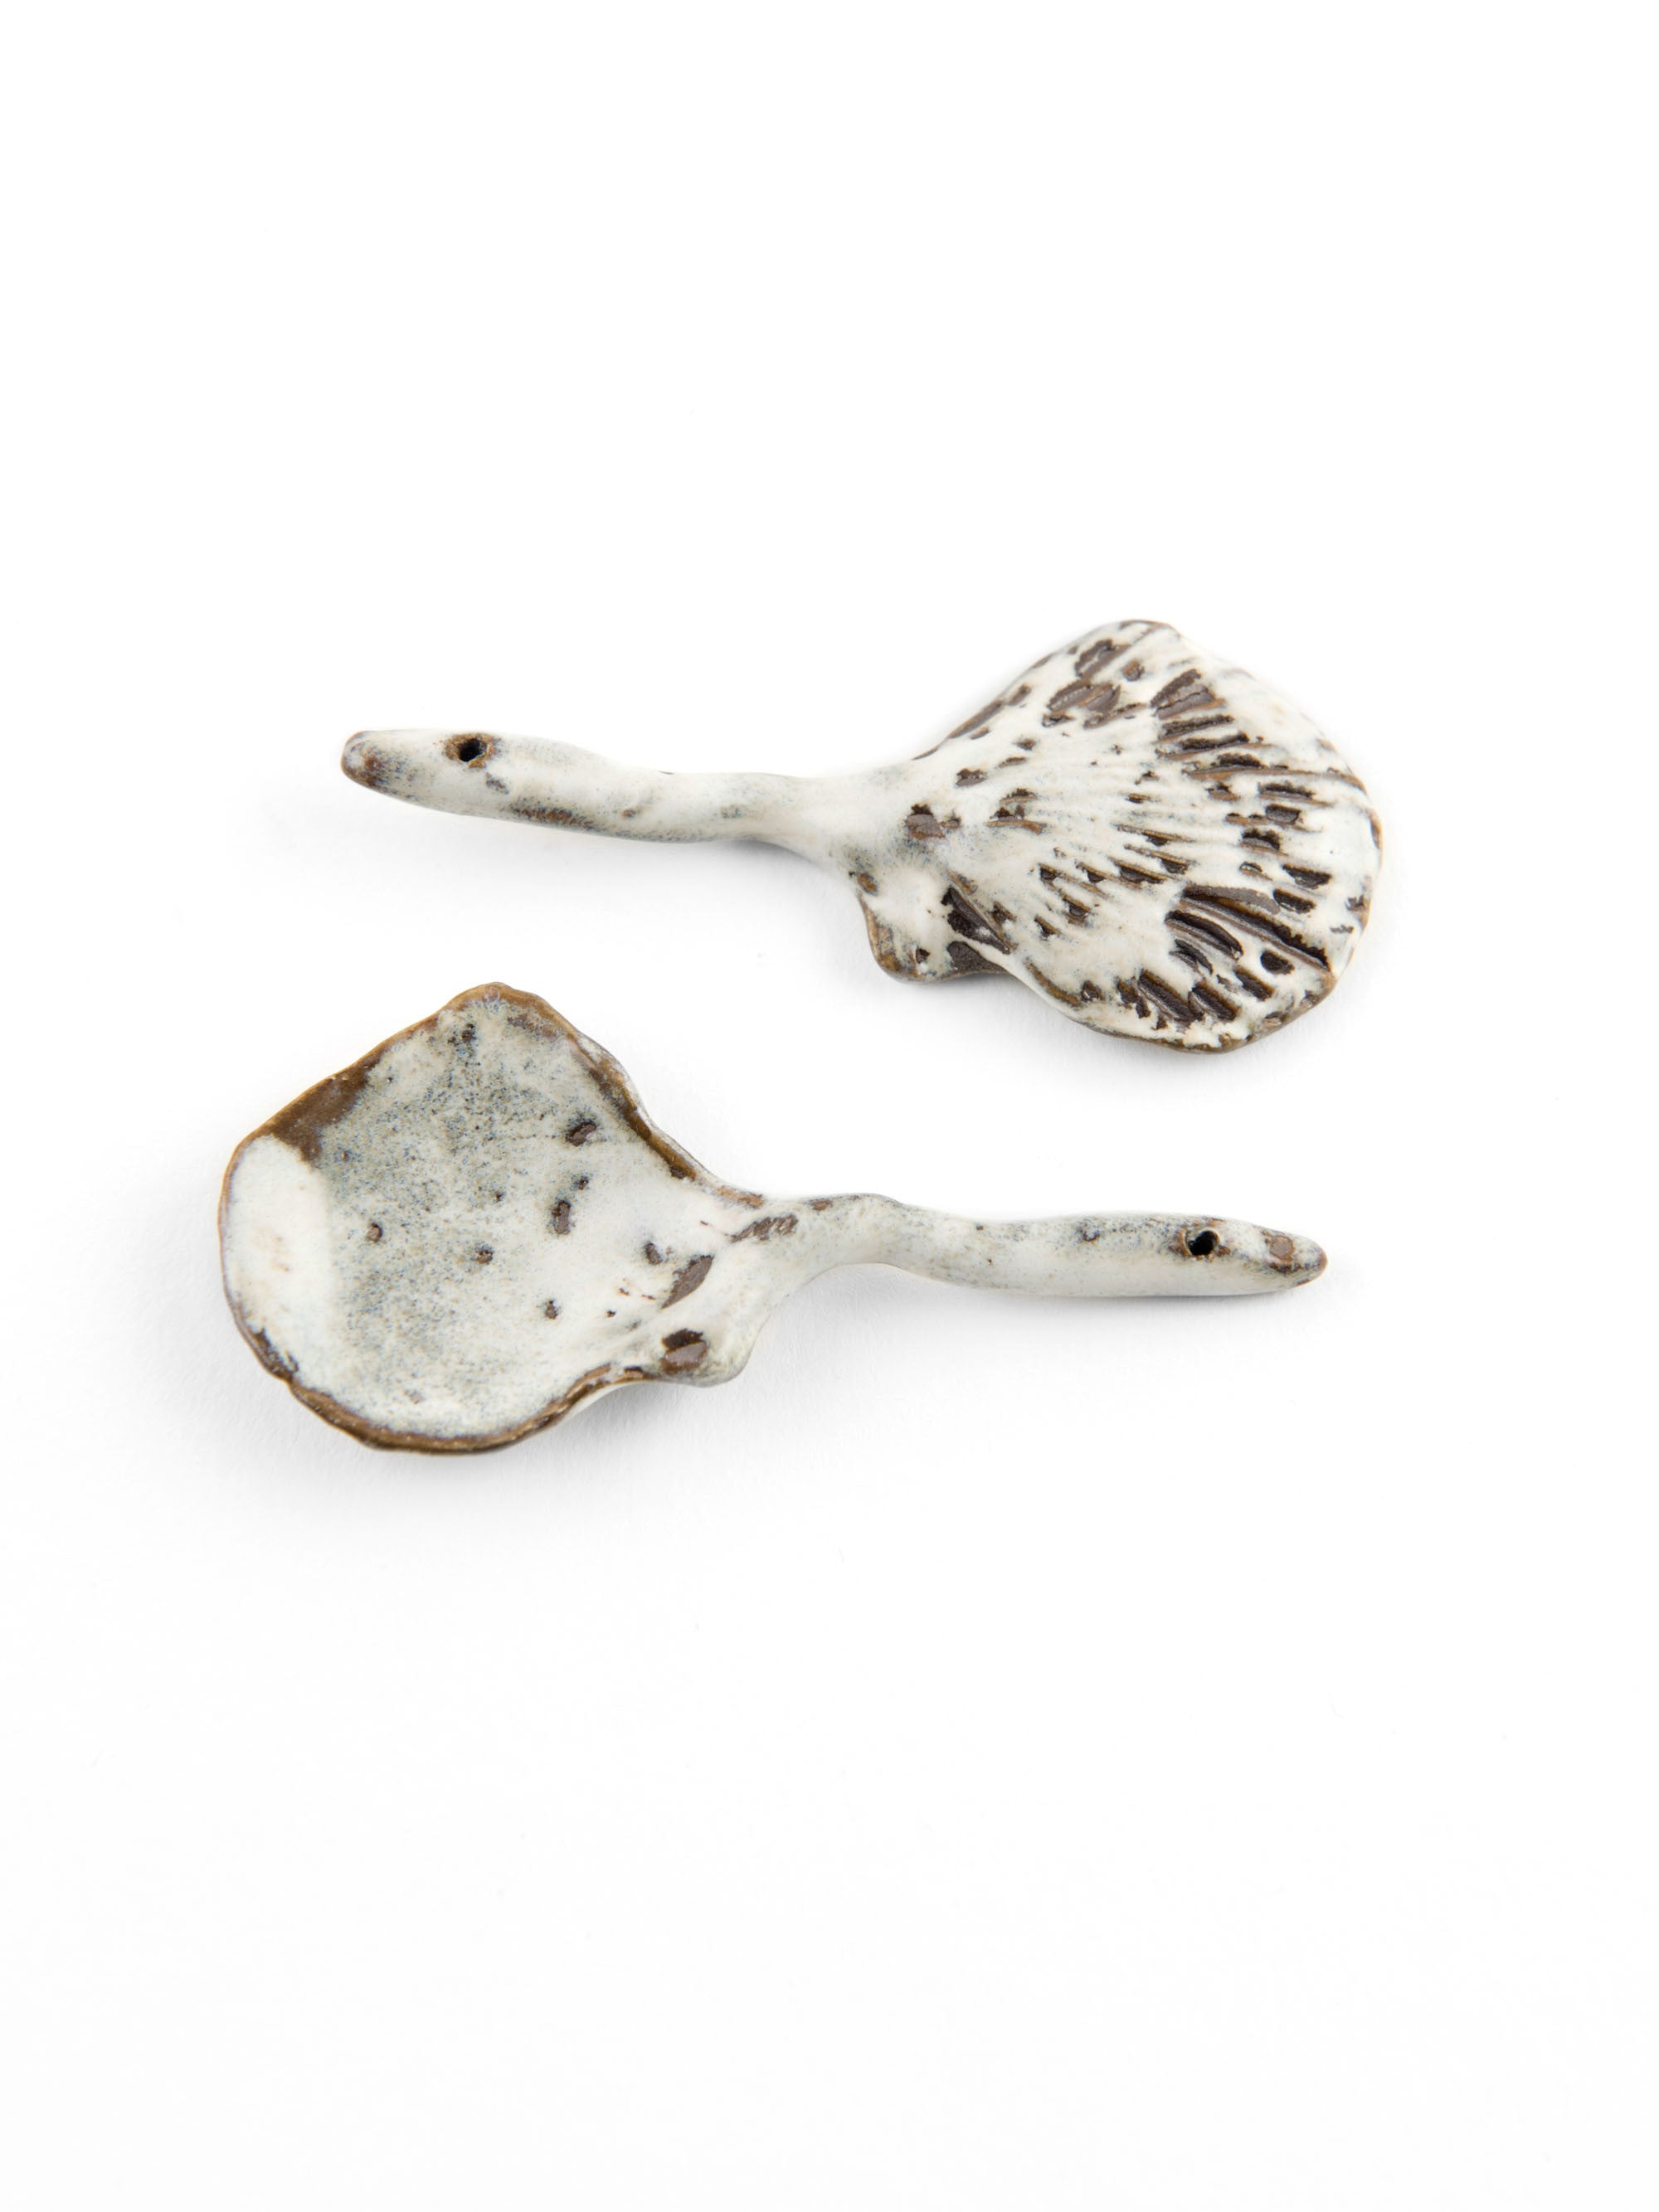 Yarnnakarn Oceanology Two Sided Shell Spoon — Kiss That Frog